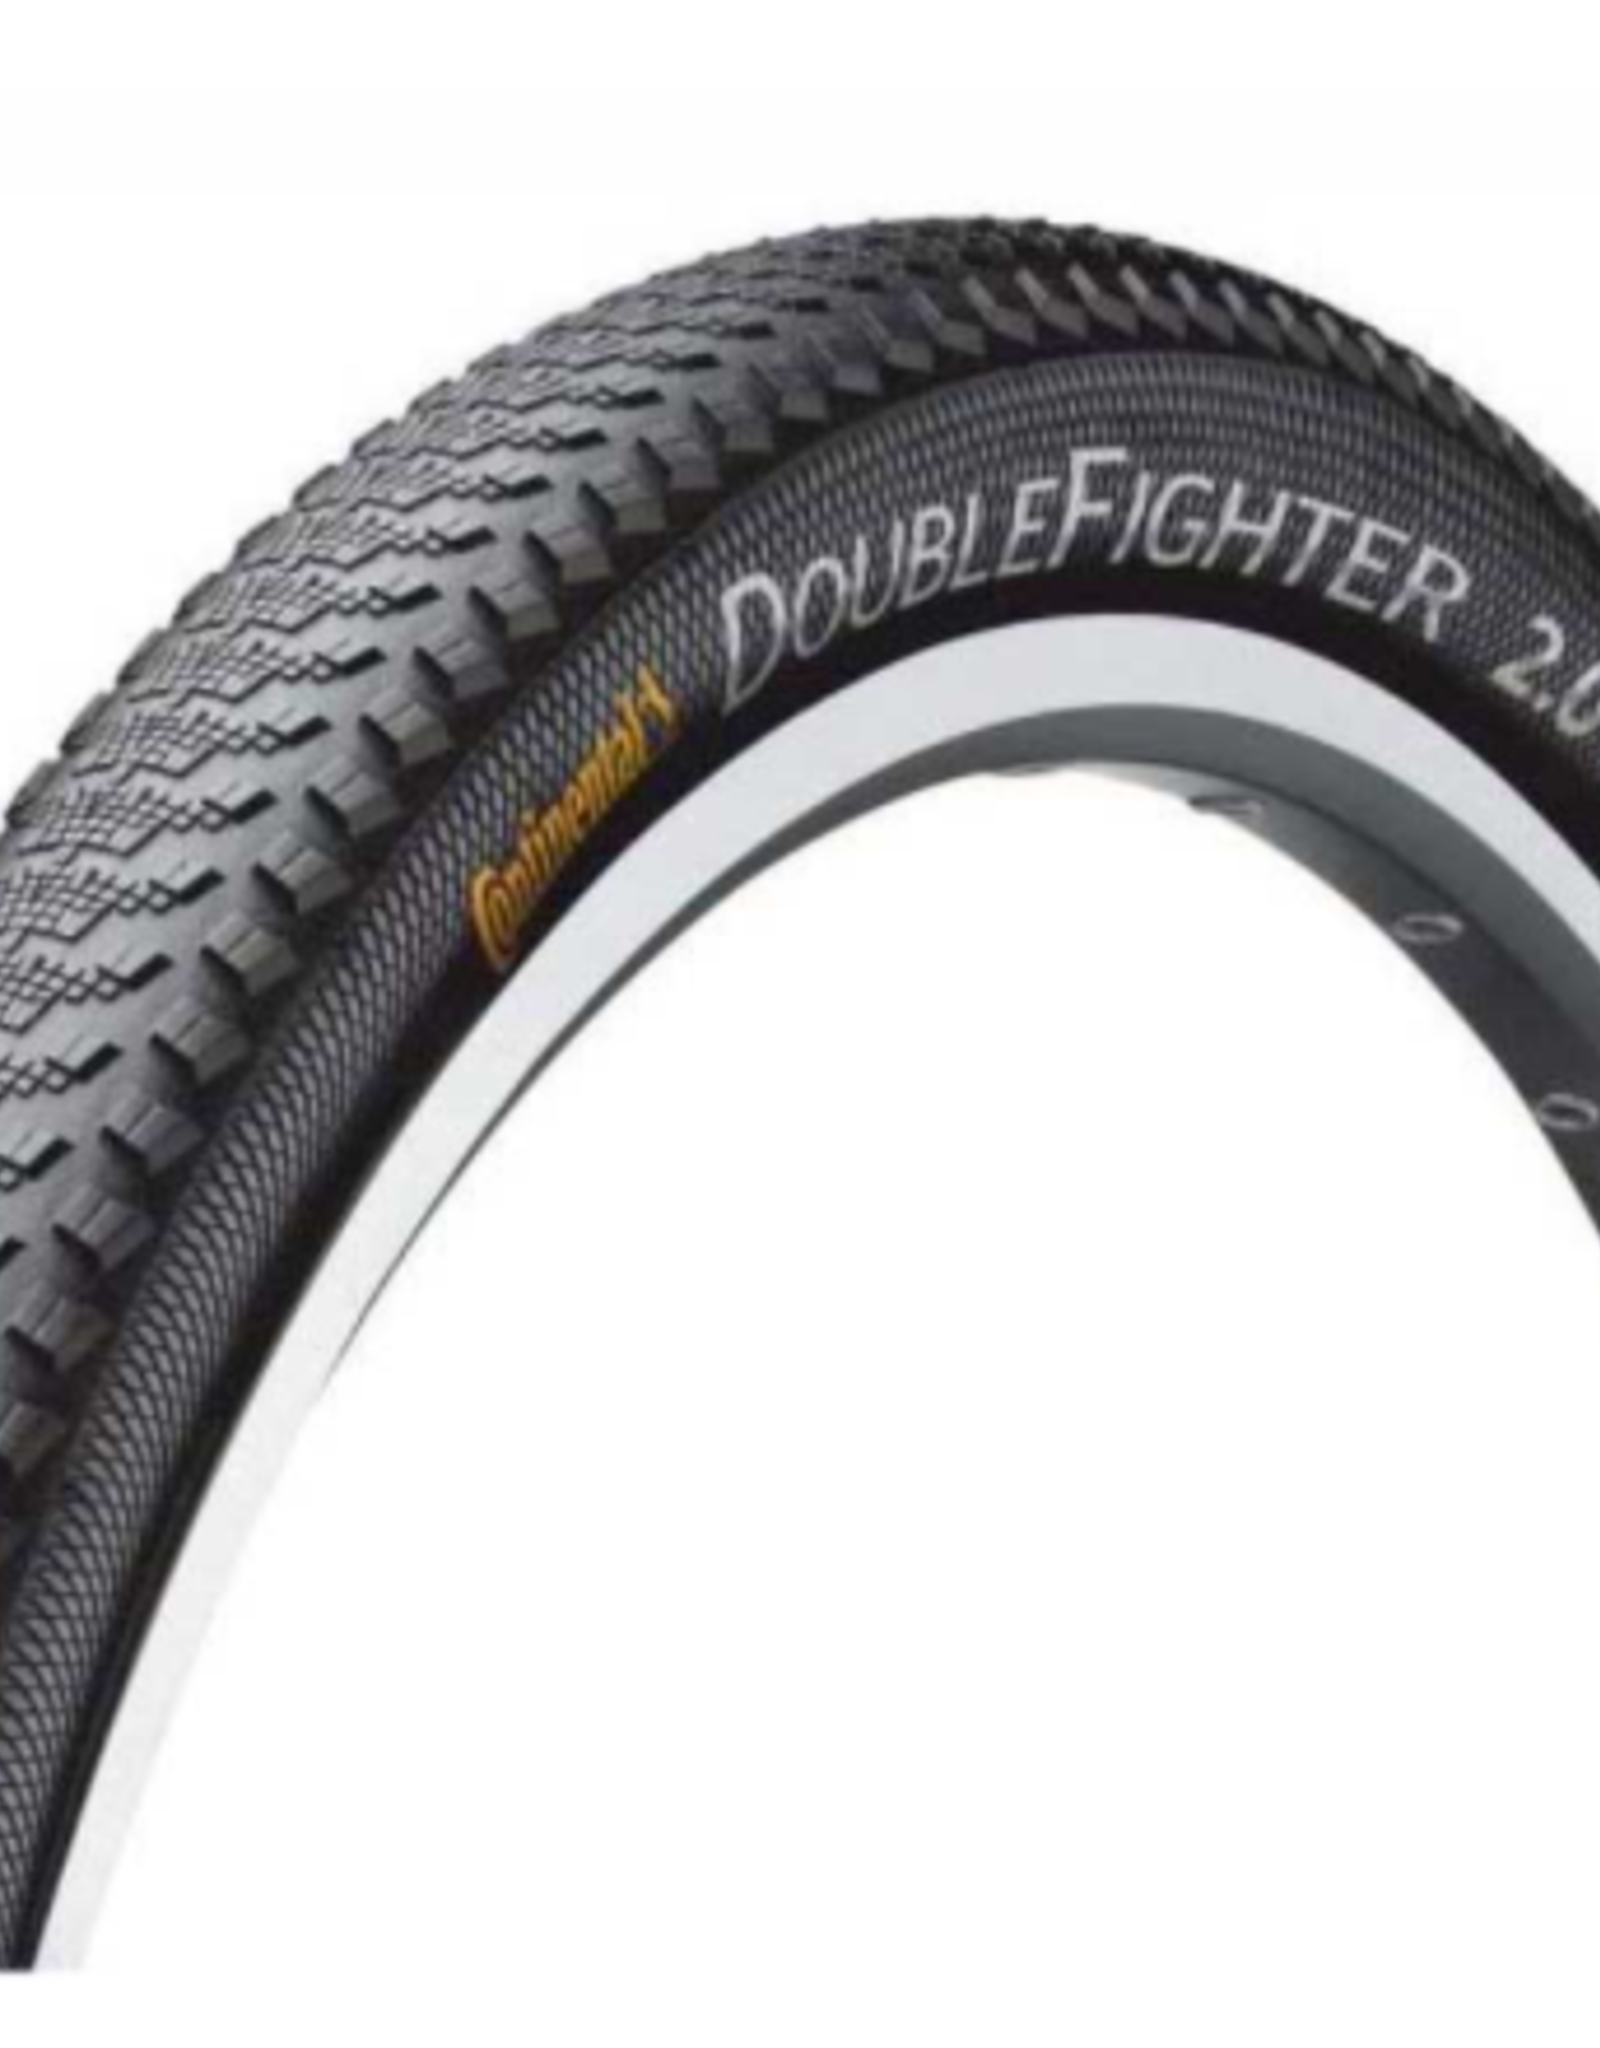 Continental Continental  Wire Bead Double Fighter III 27.5 x 2.0 BW